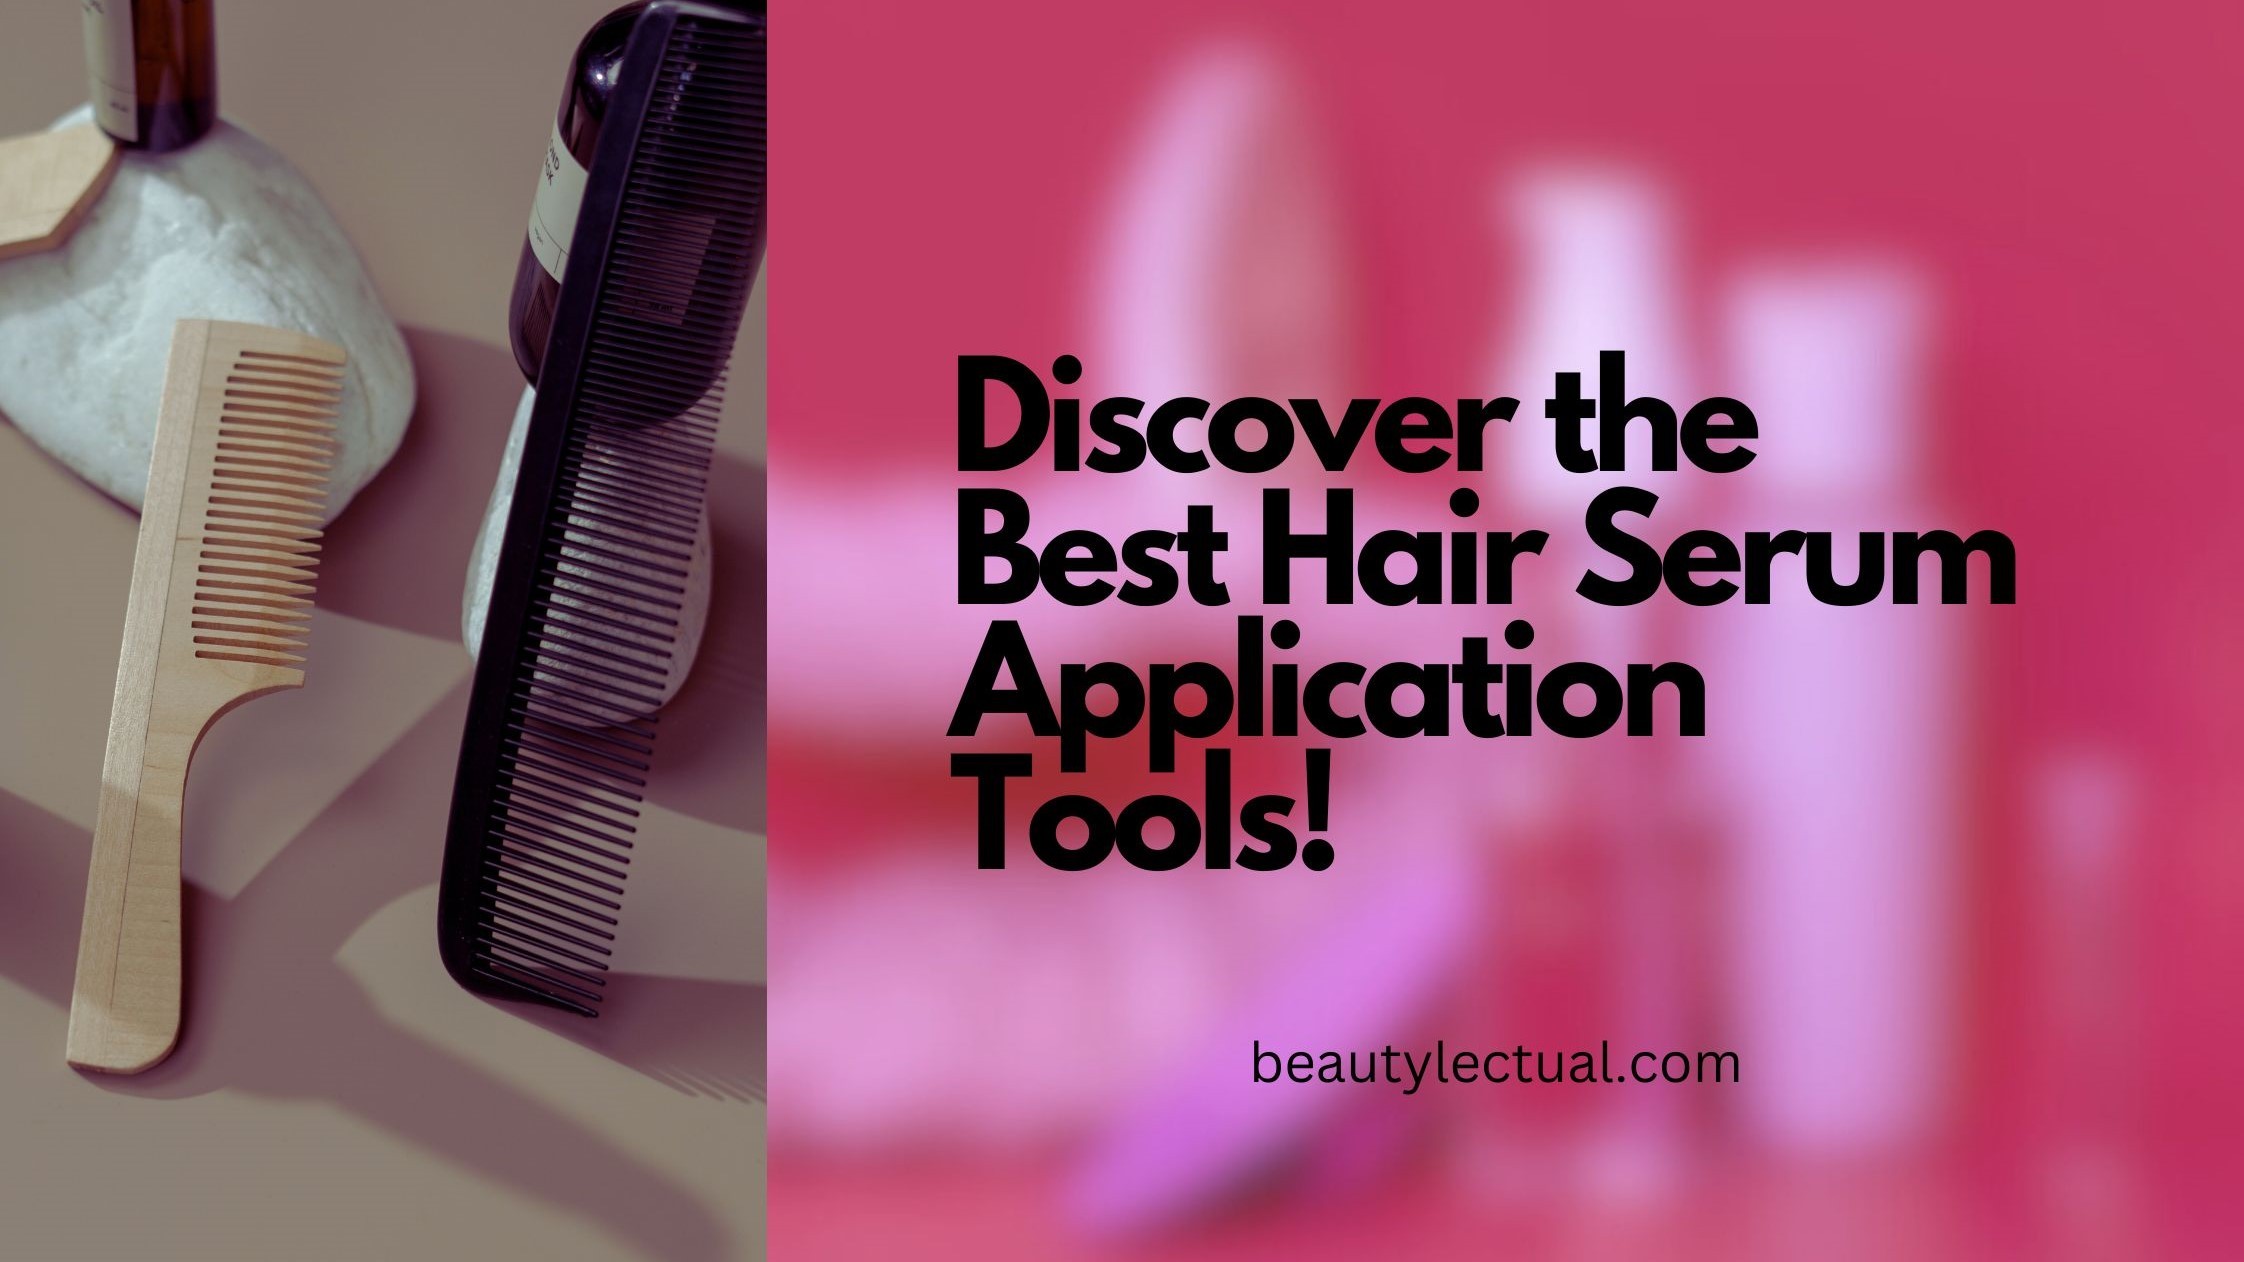 Discover the Best Hair Serum Application Tools